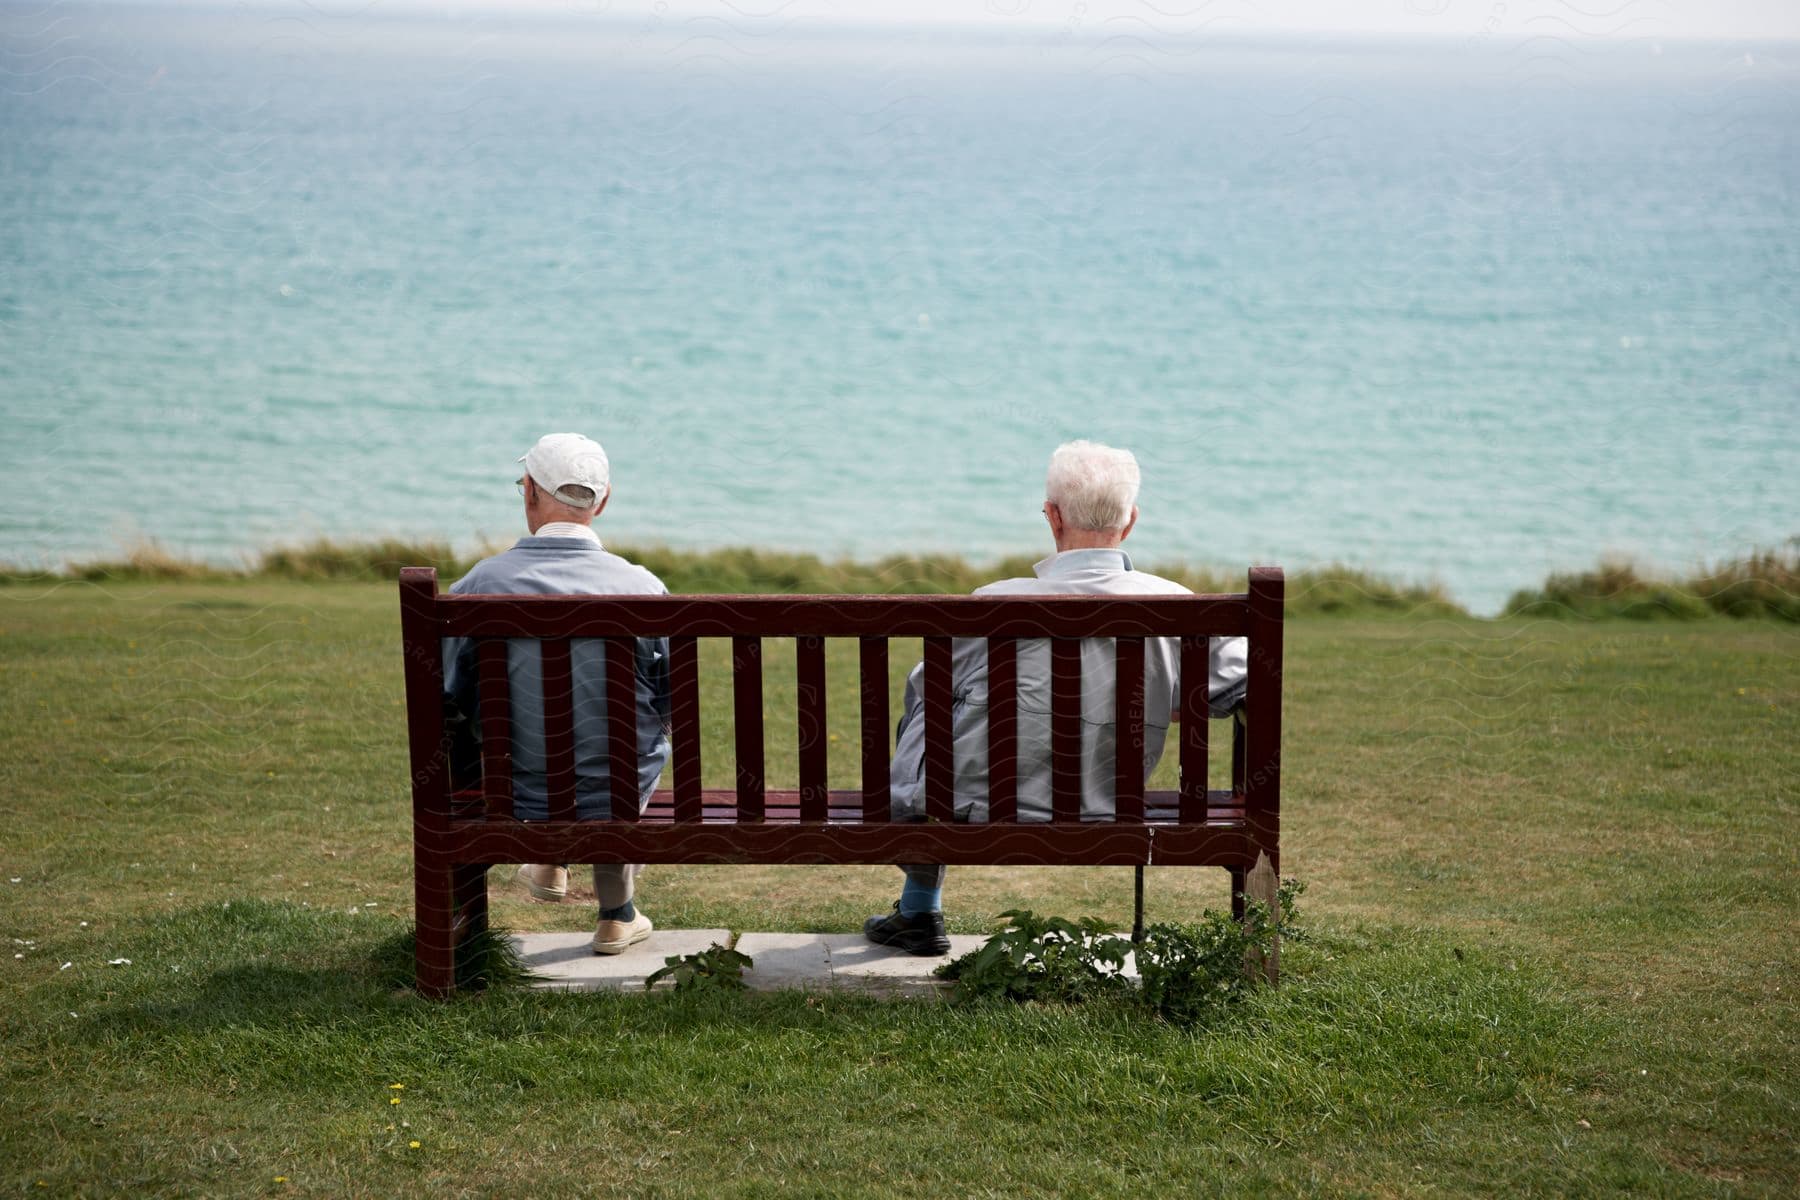 Two elderly men sit on a bench near the sea on a coastal island covered in grass during the day. One of them wears a baseball hat.